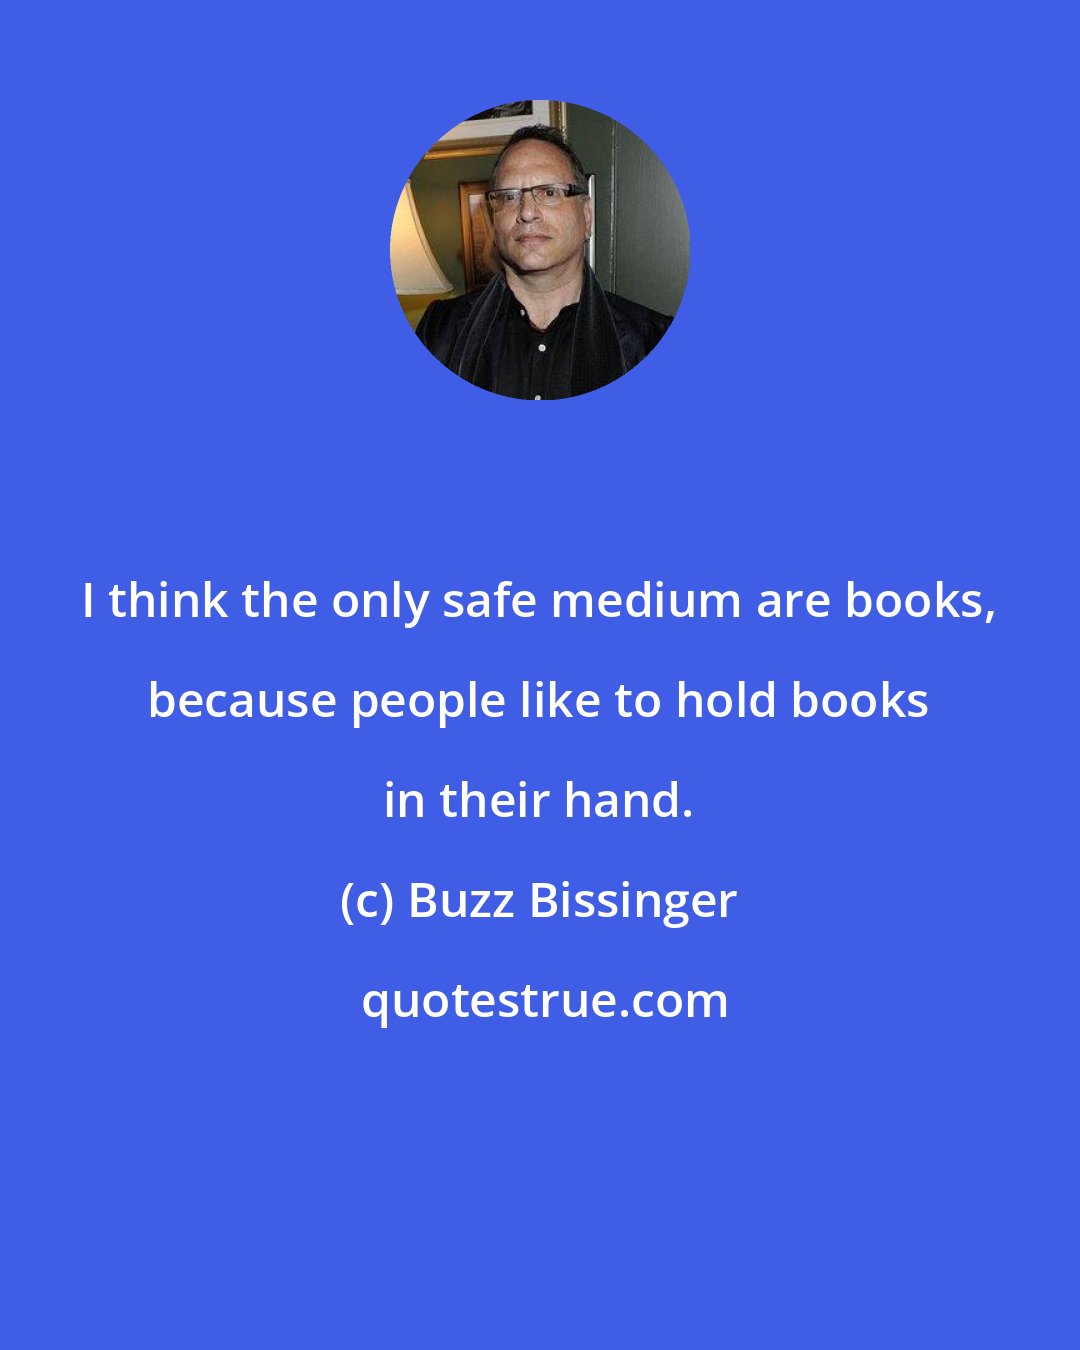 Buzz Bissinger: I think the only safe medium are books, because people like to hold books in their hand.